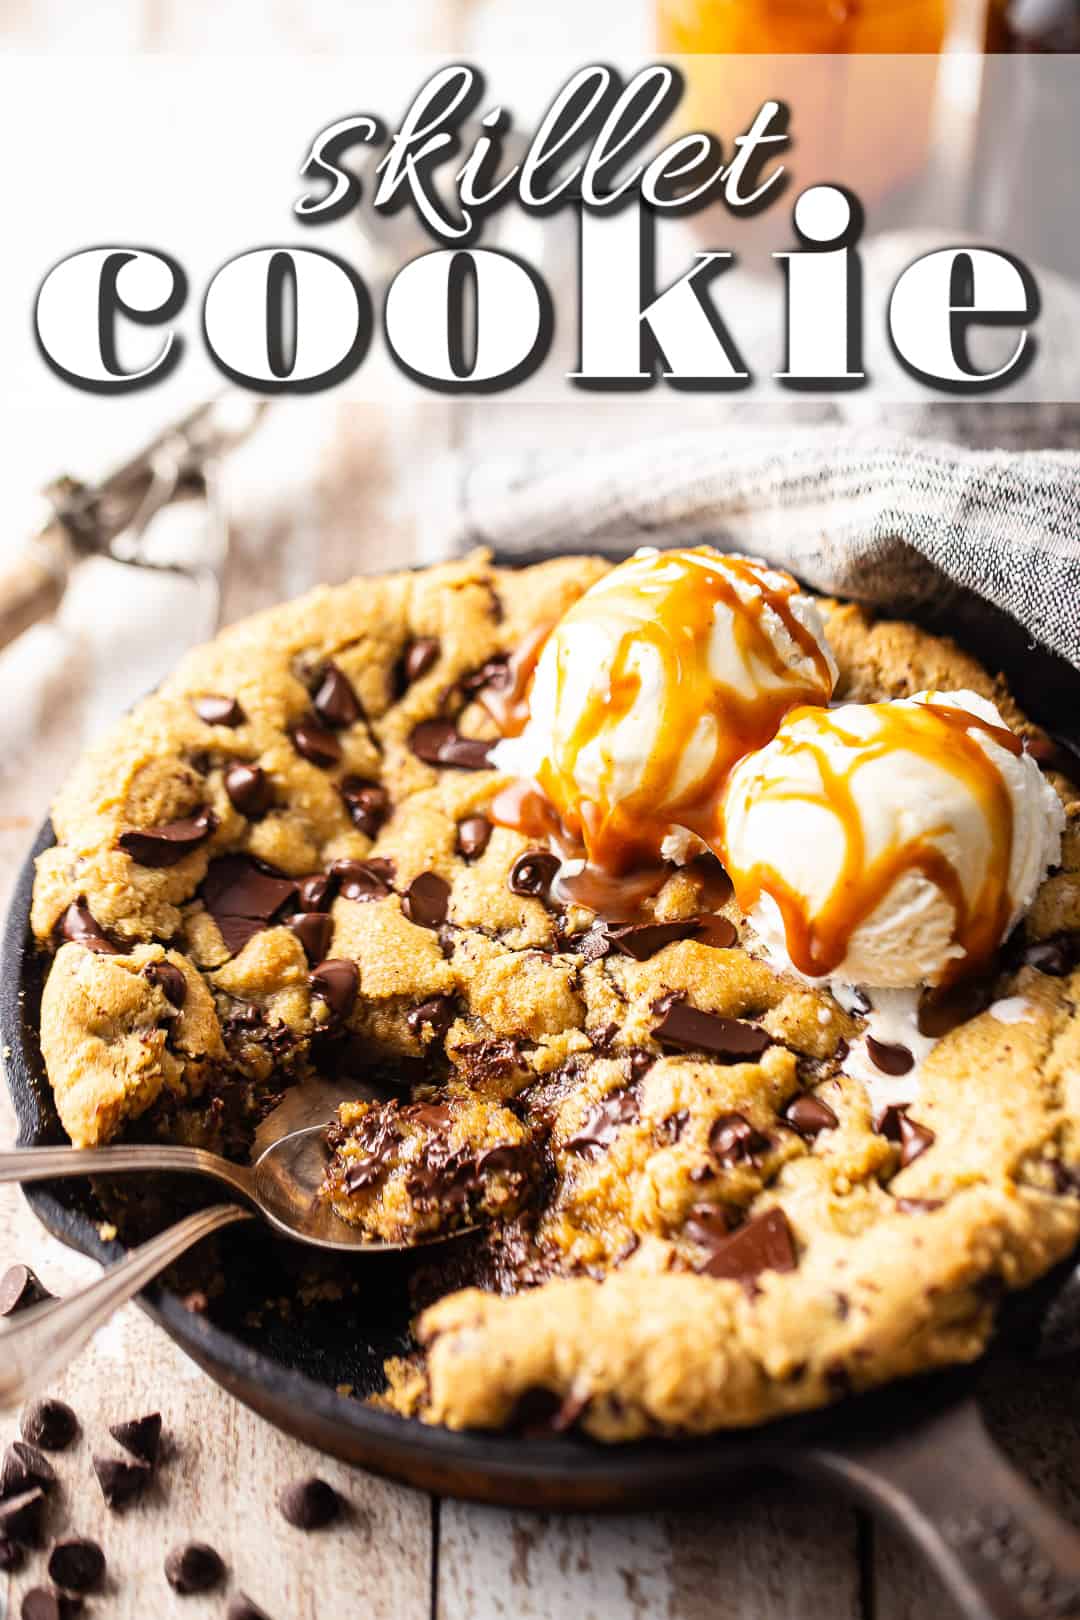 Skillet cookie recipe, baked and topped with ice cream and caramel sauce.